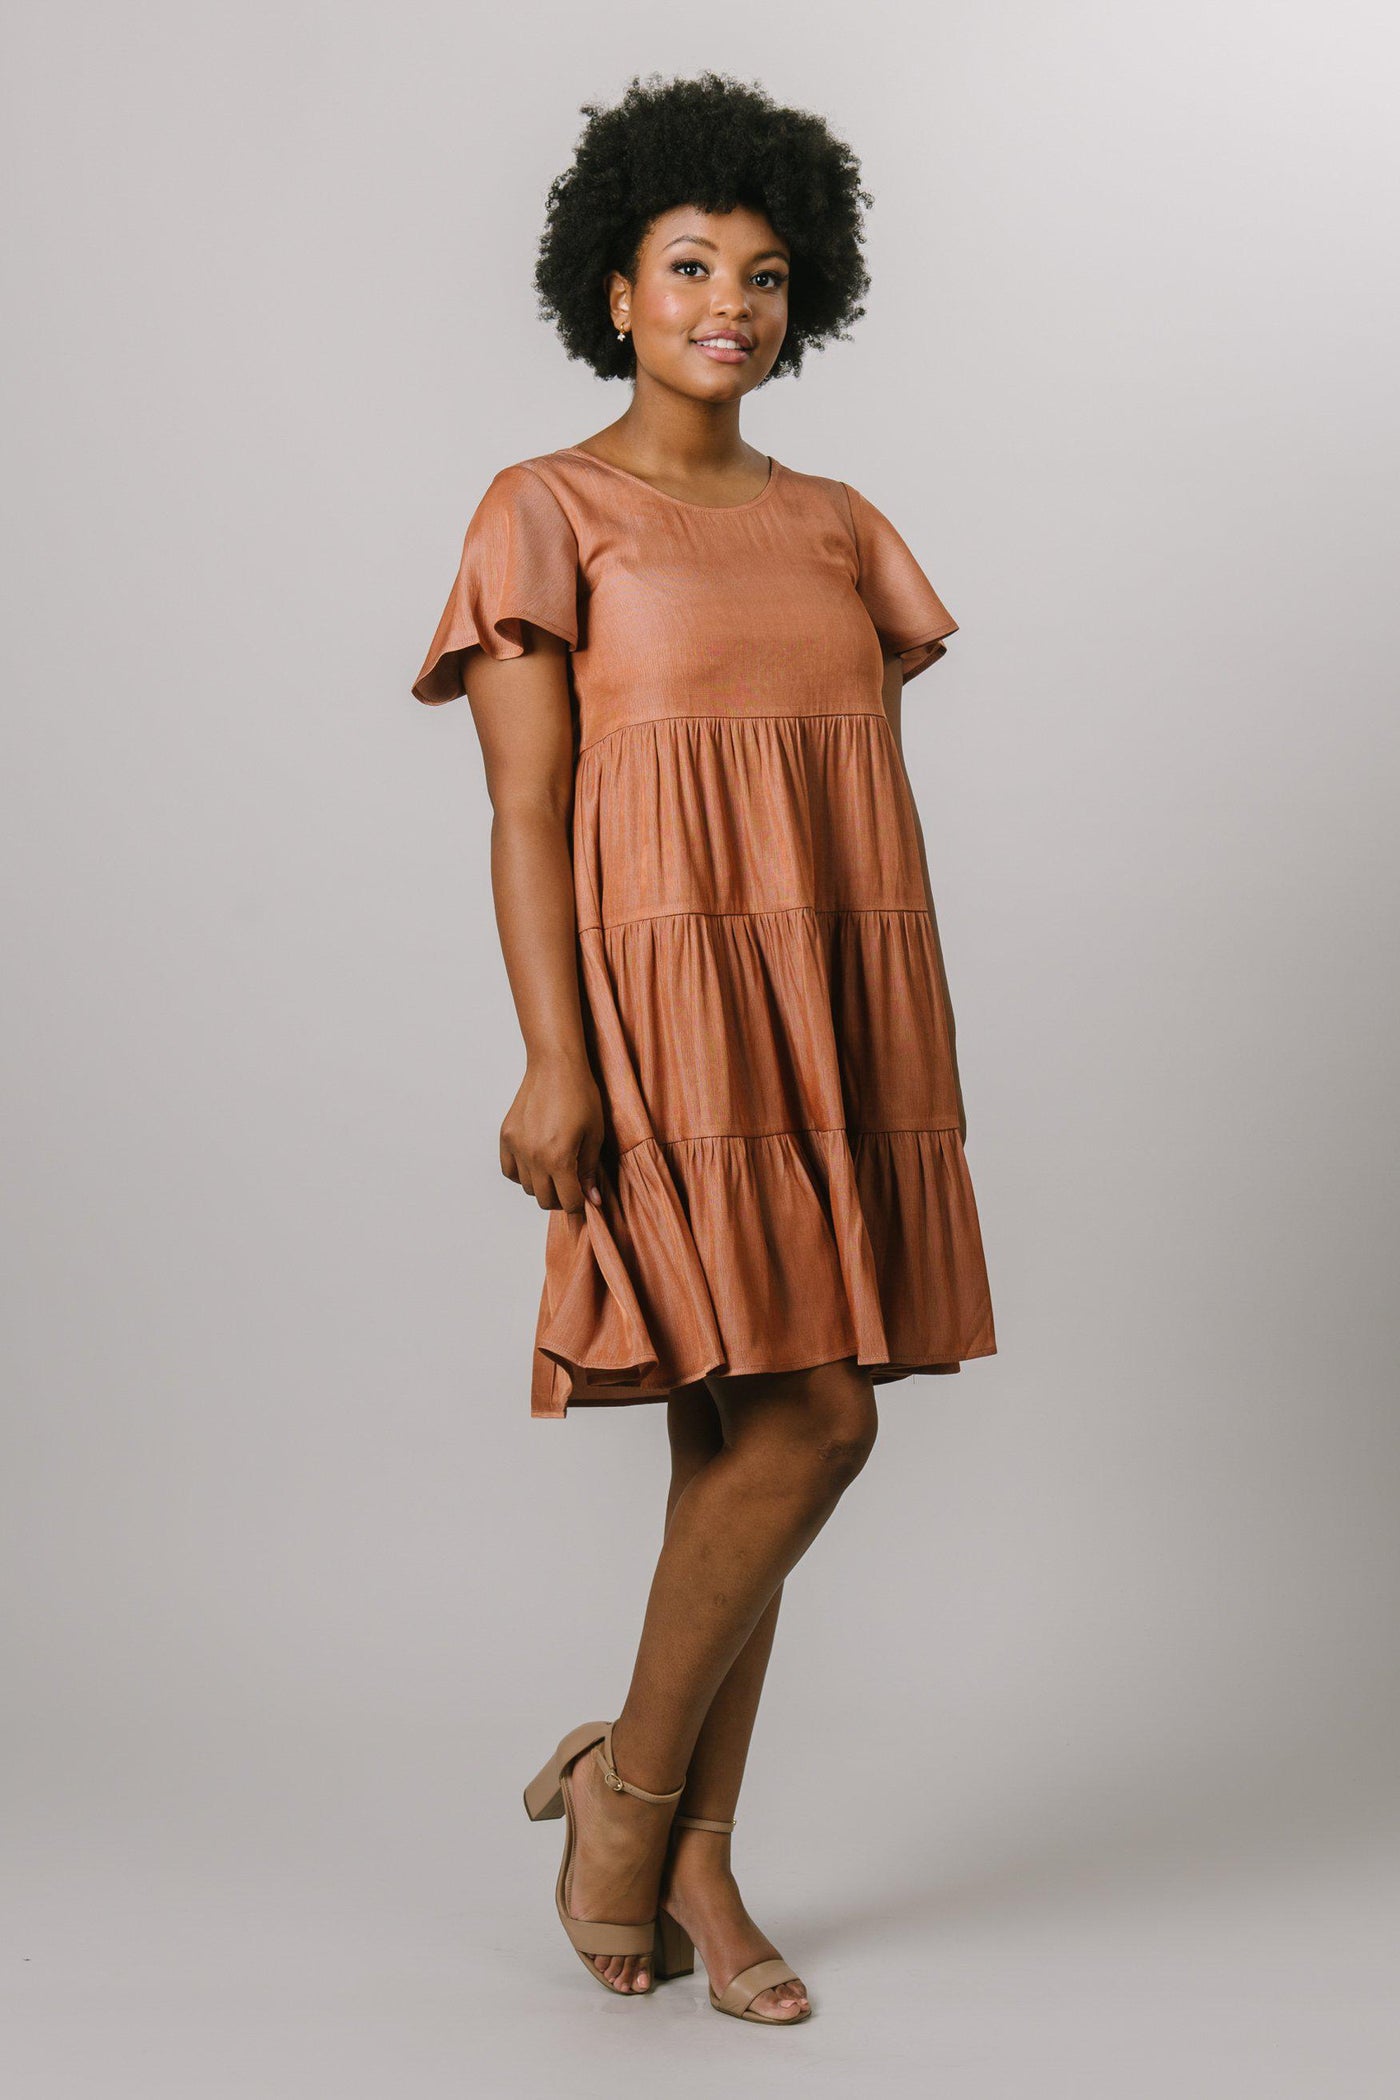 A tiered dress with a scoop neck and flutter sleeves in burnt ginger.Modest Dresses - Modest Clothing - Everyday Modest Dresses - Bridesmaid Modest Dresses